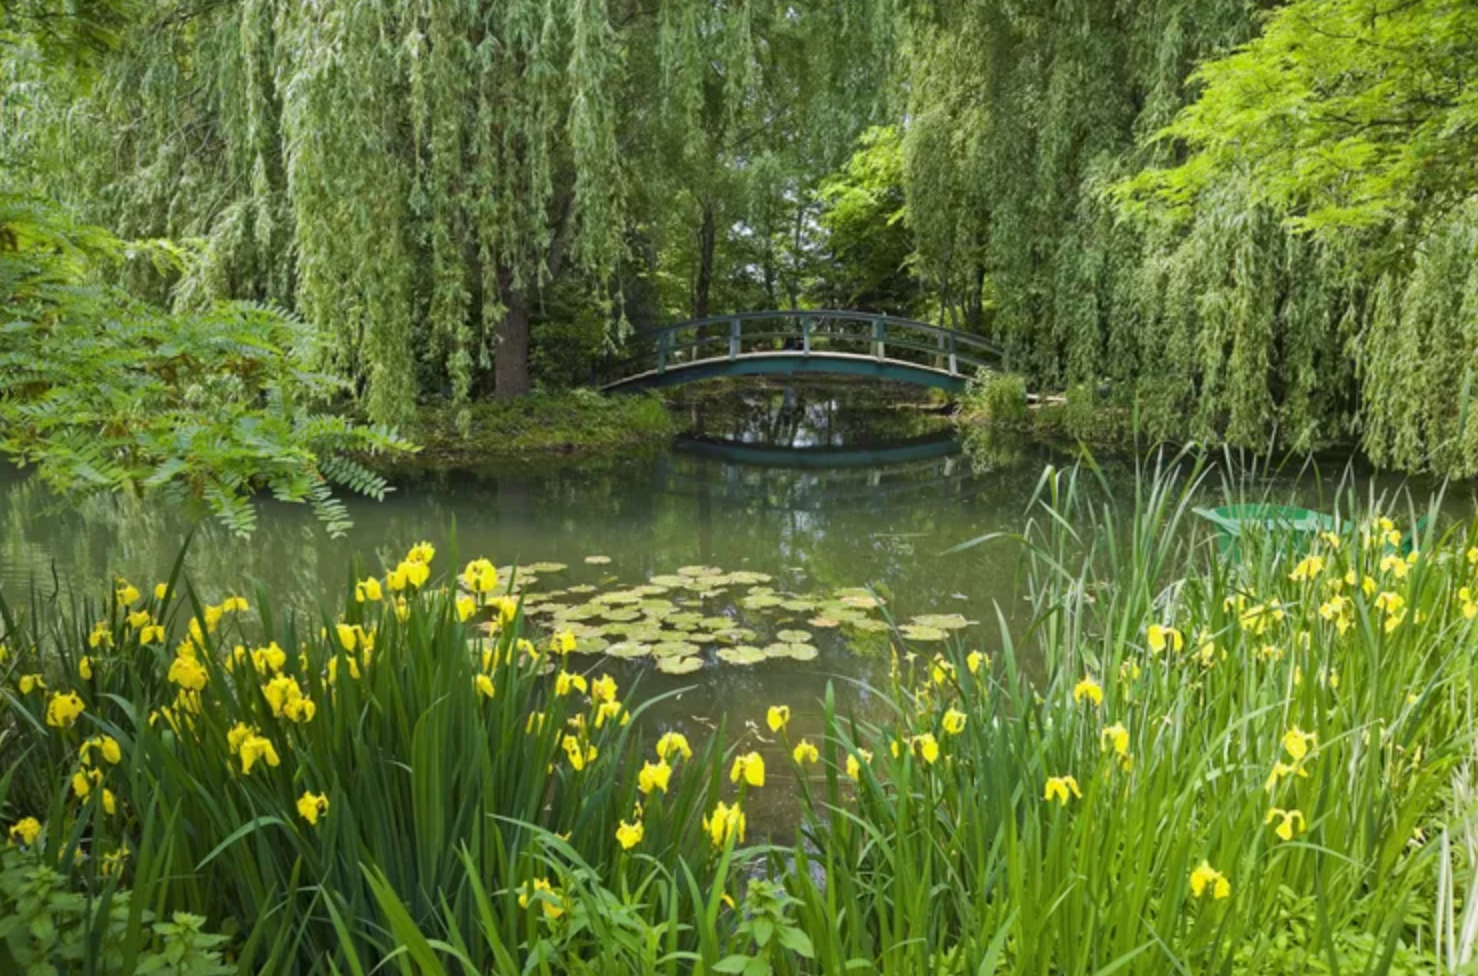 Monet’s Gardens at Giverny